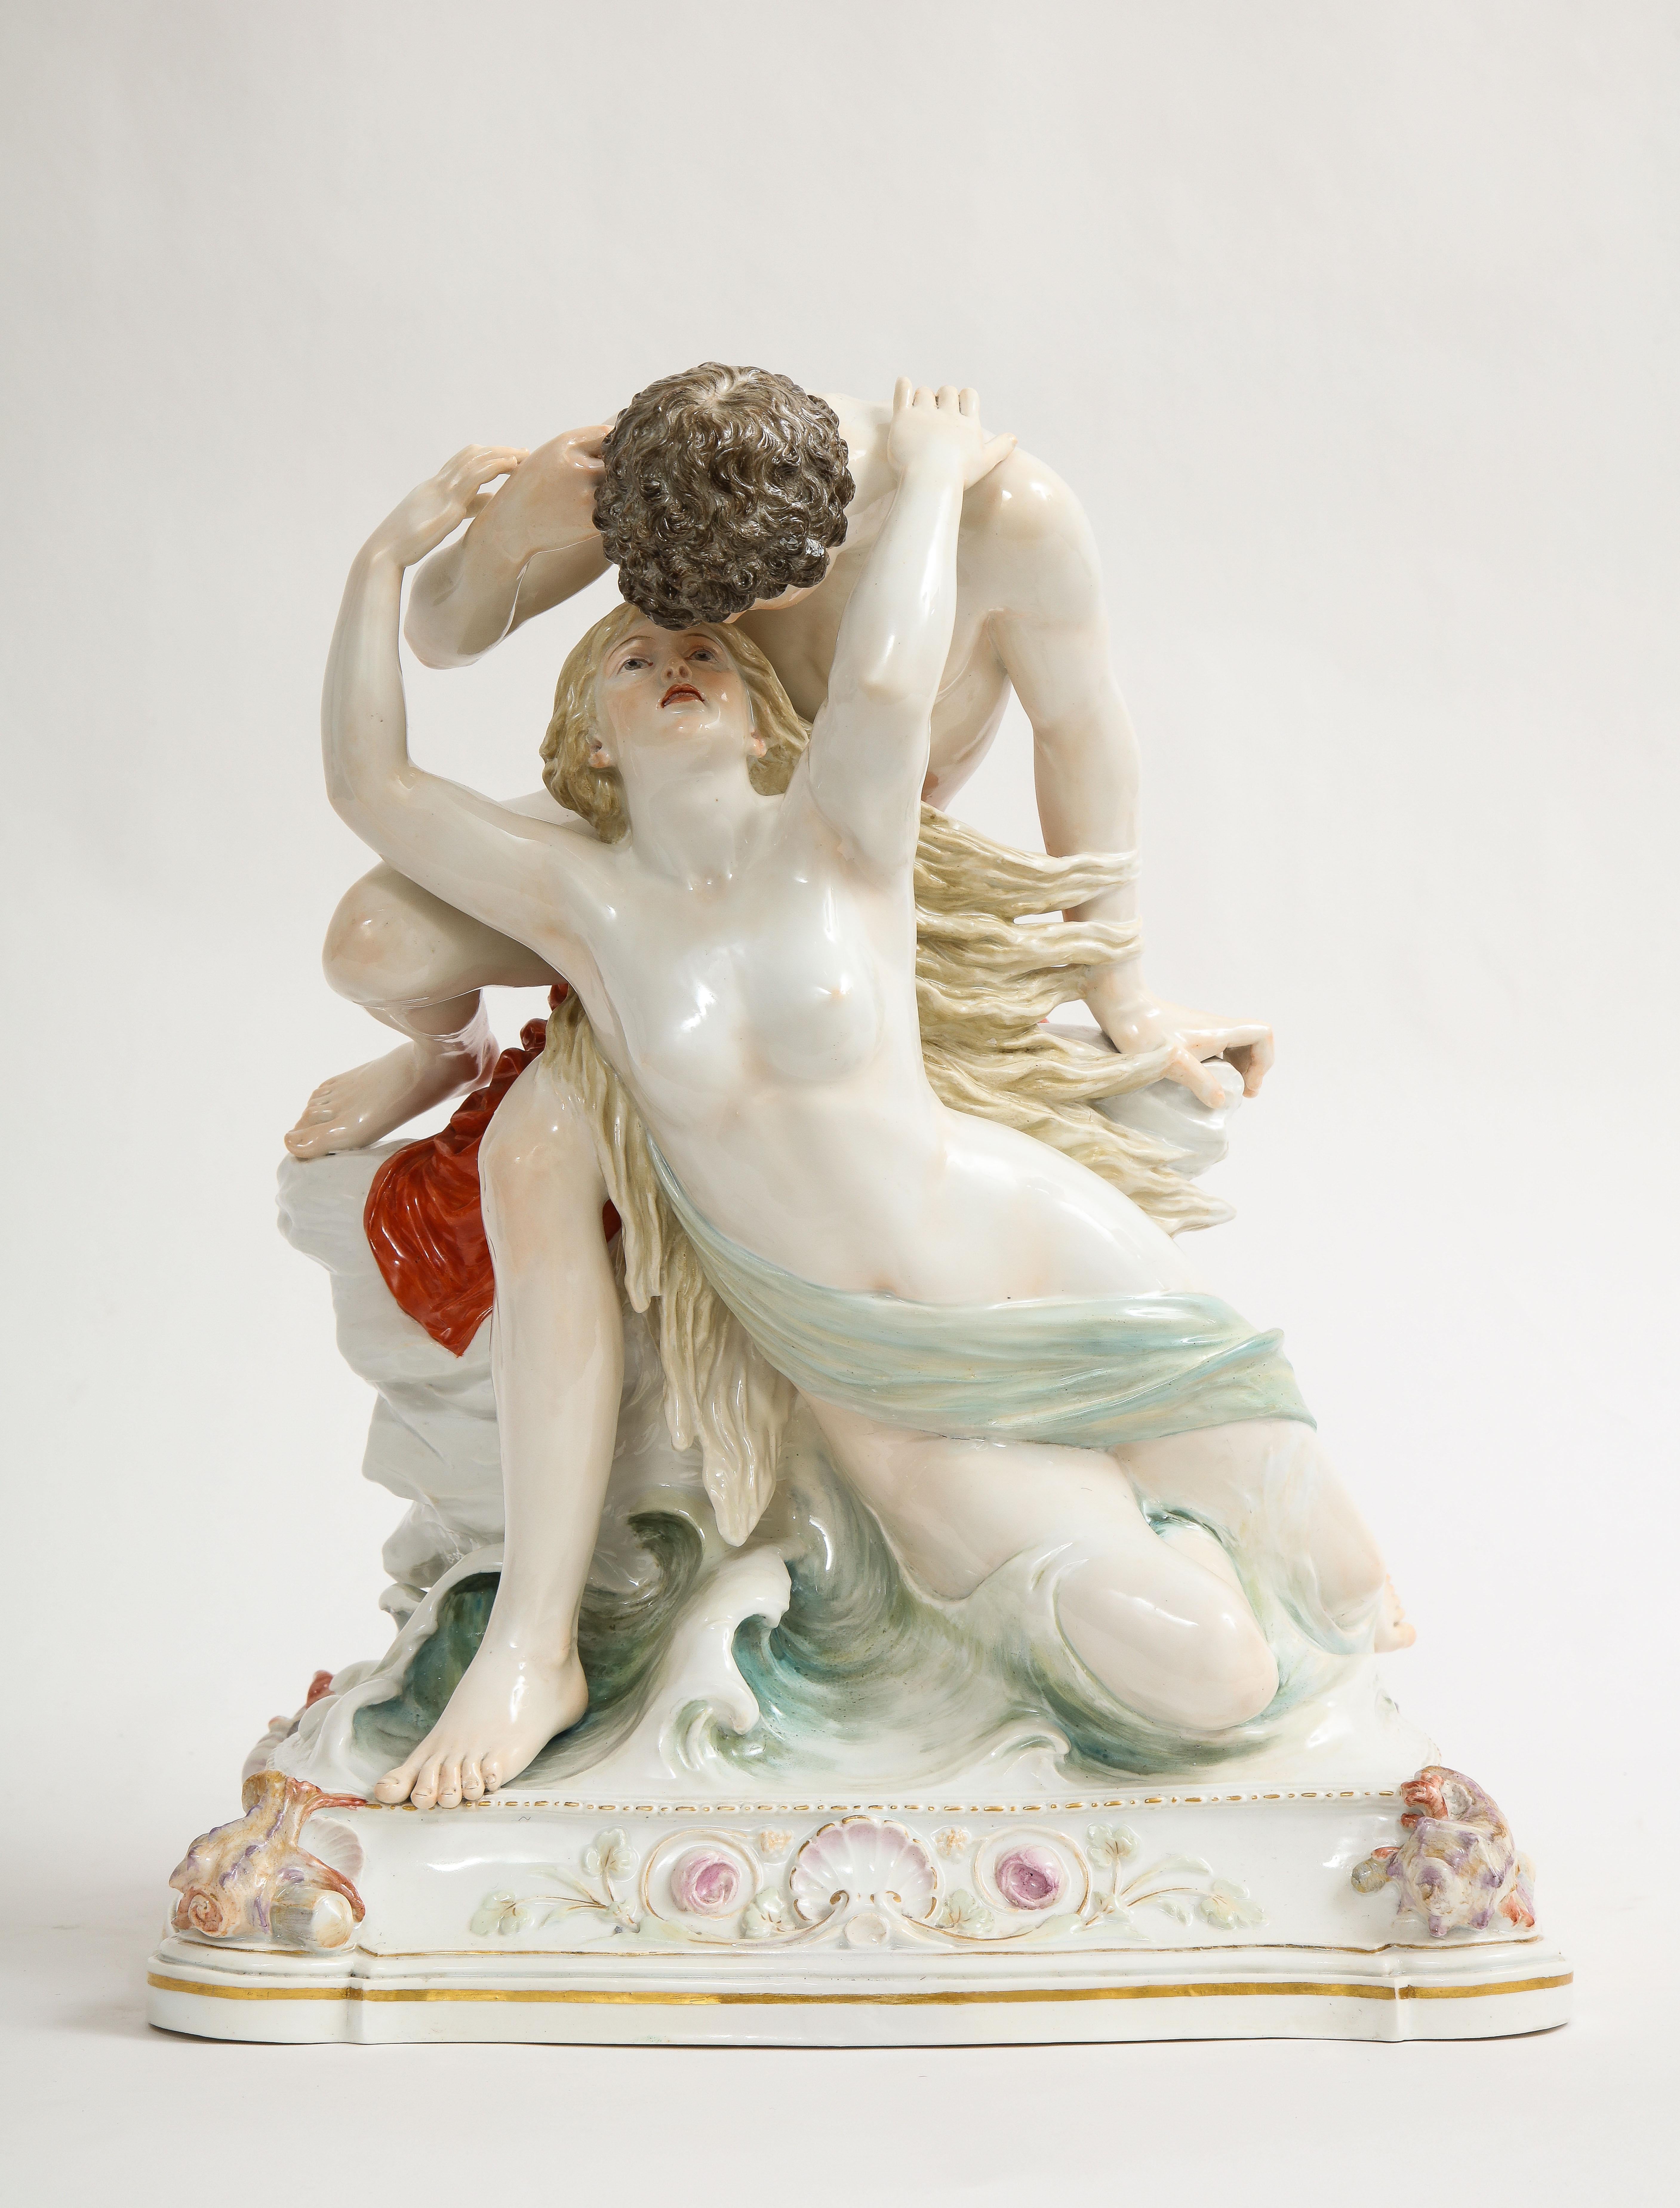 A Large Meissen Porcelain group of lovers kissing in the Ocean on a Rock. This piece is truly spectacular in both quality and size. The pair of lovers are seen perched a top a large rock in the middle of a cracking ocean. The waves are crashing by